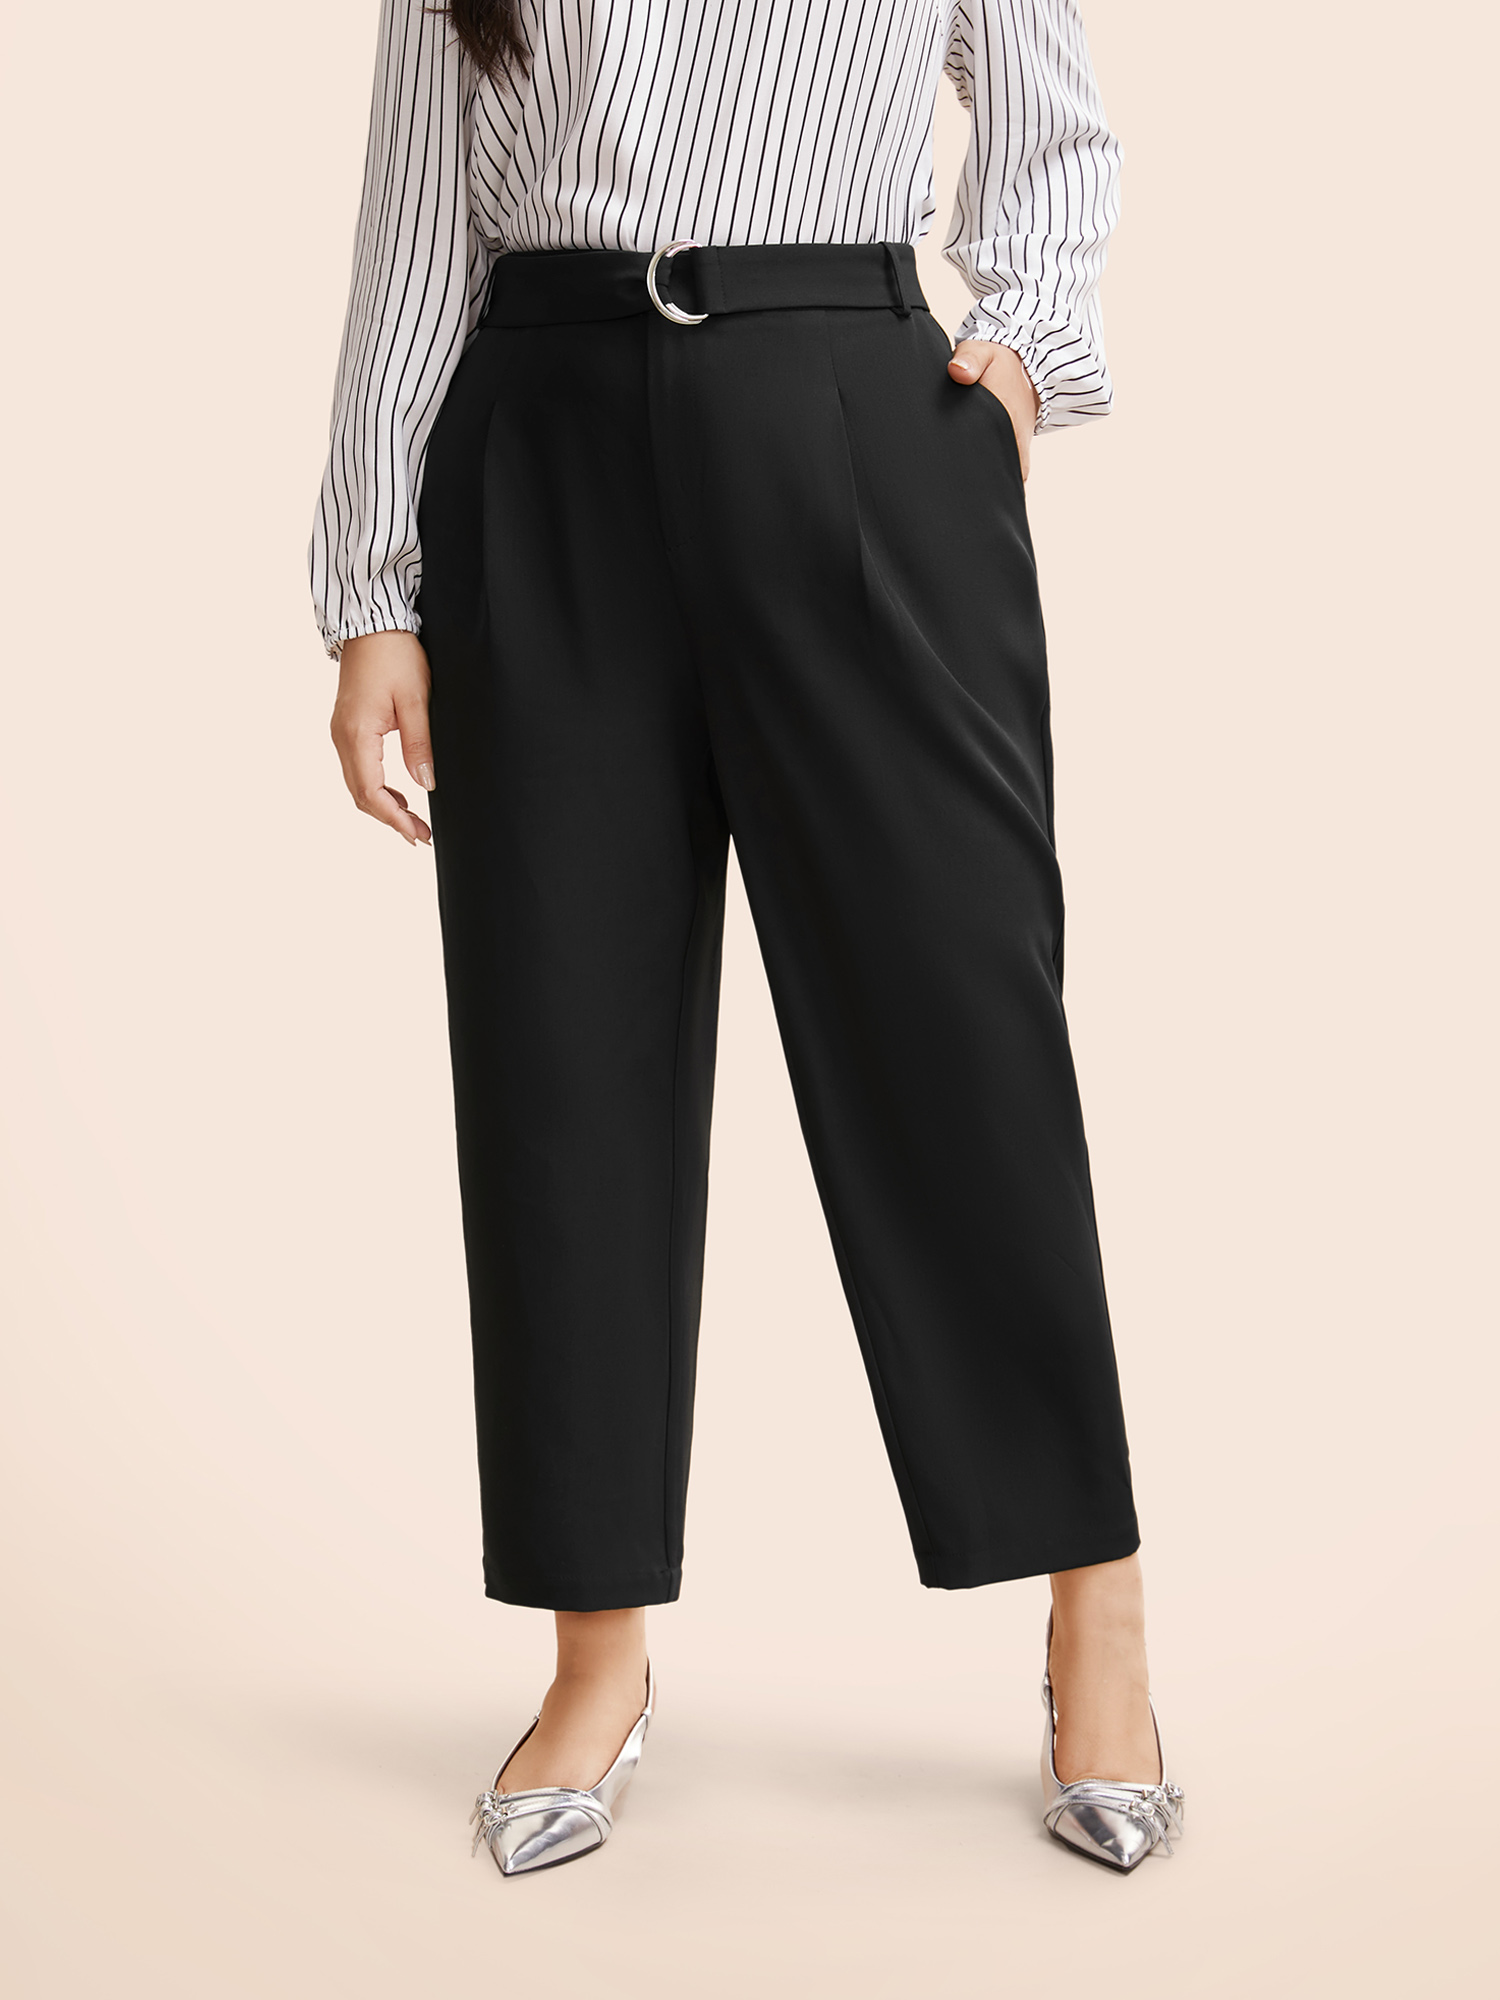 

Plus Size Mid Pleated Rise Belted Pants Women Black At the Office Mid Rise Work Pants BloomChic